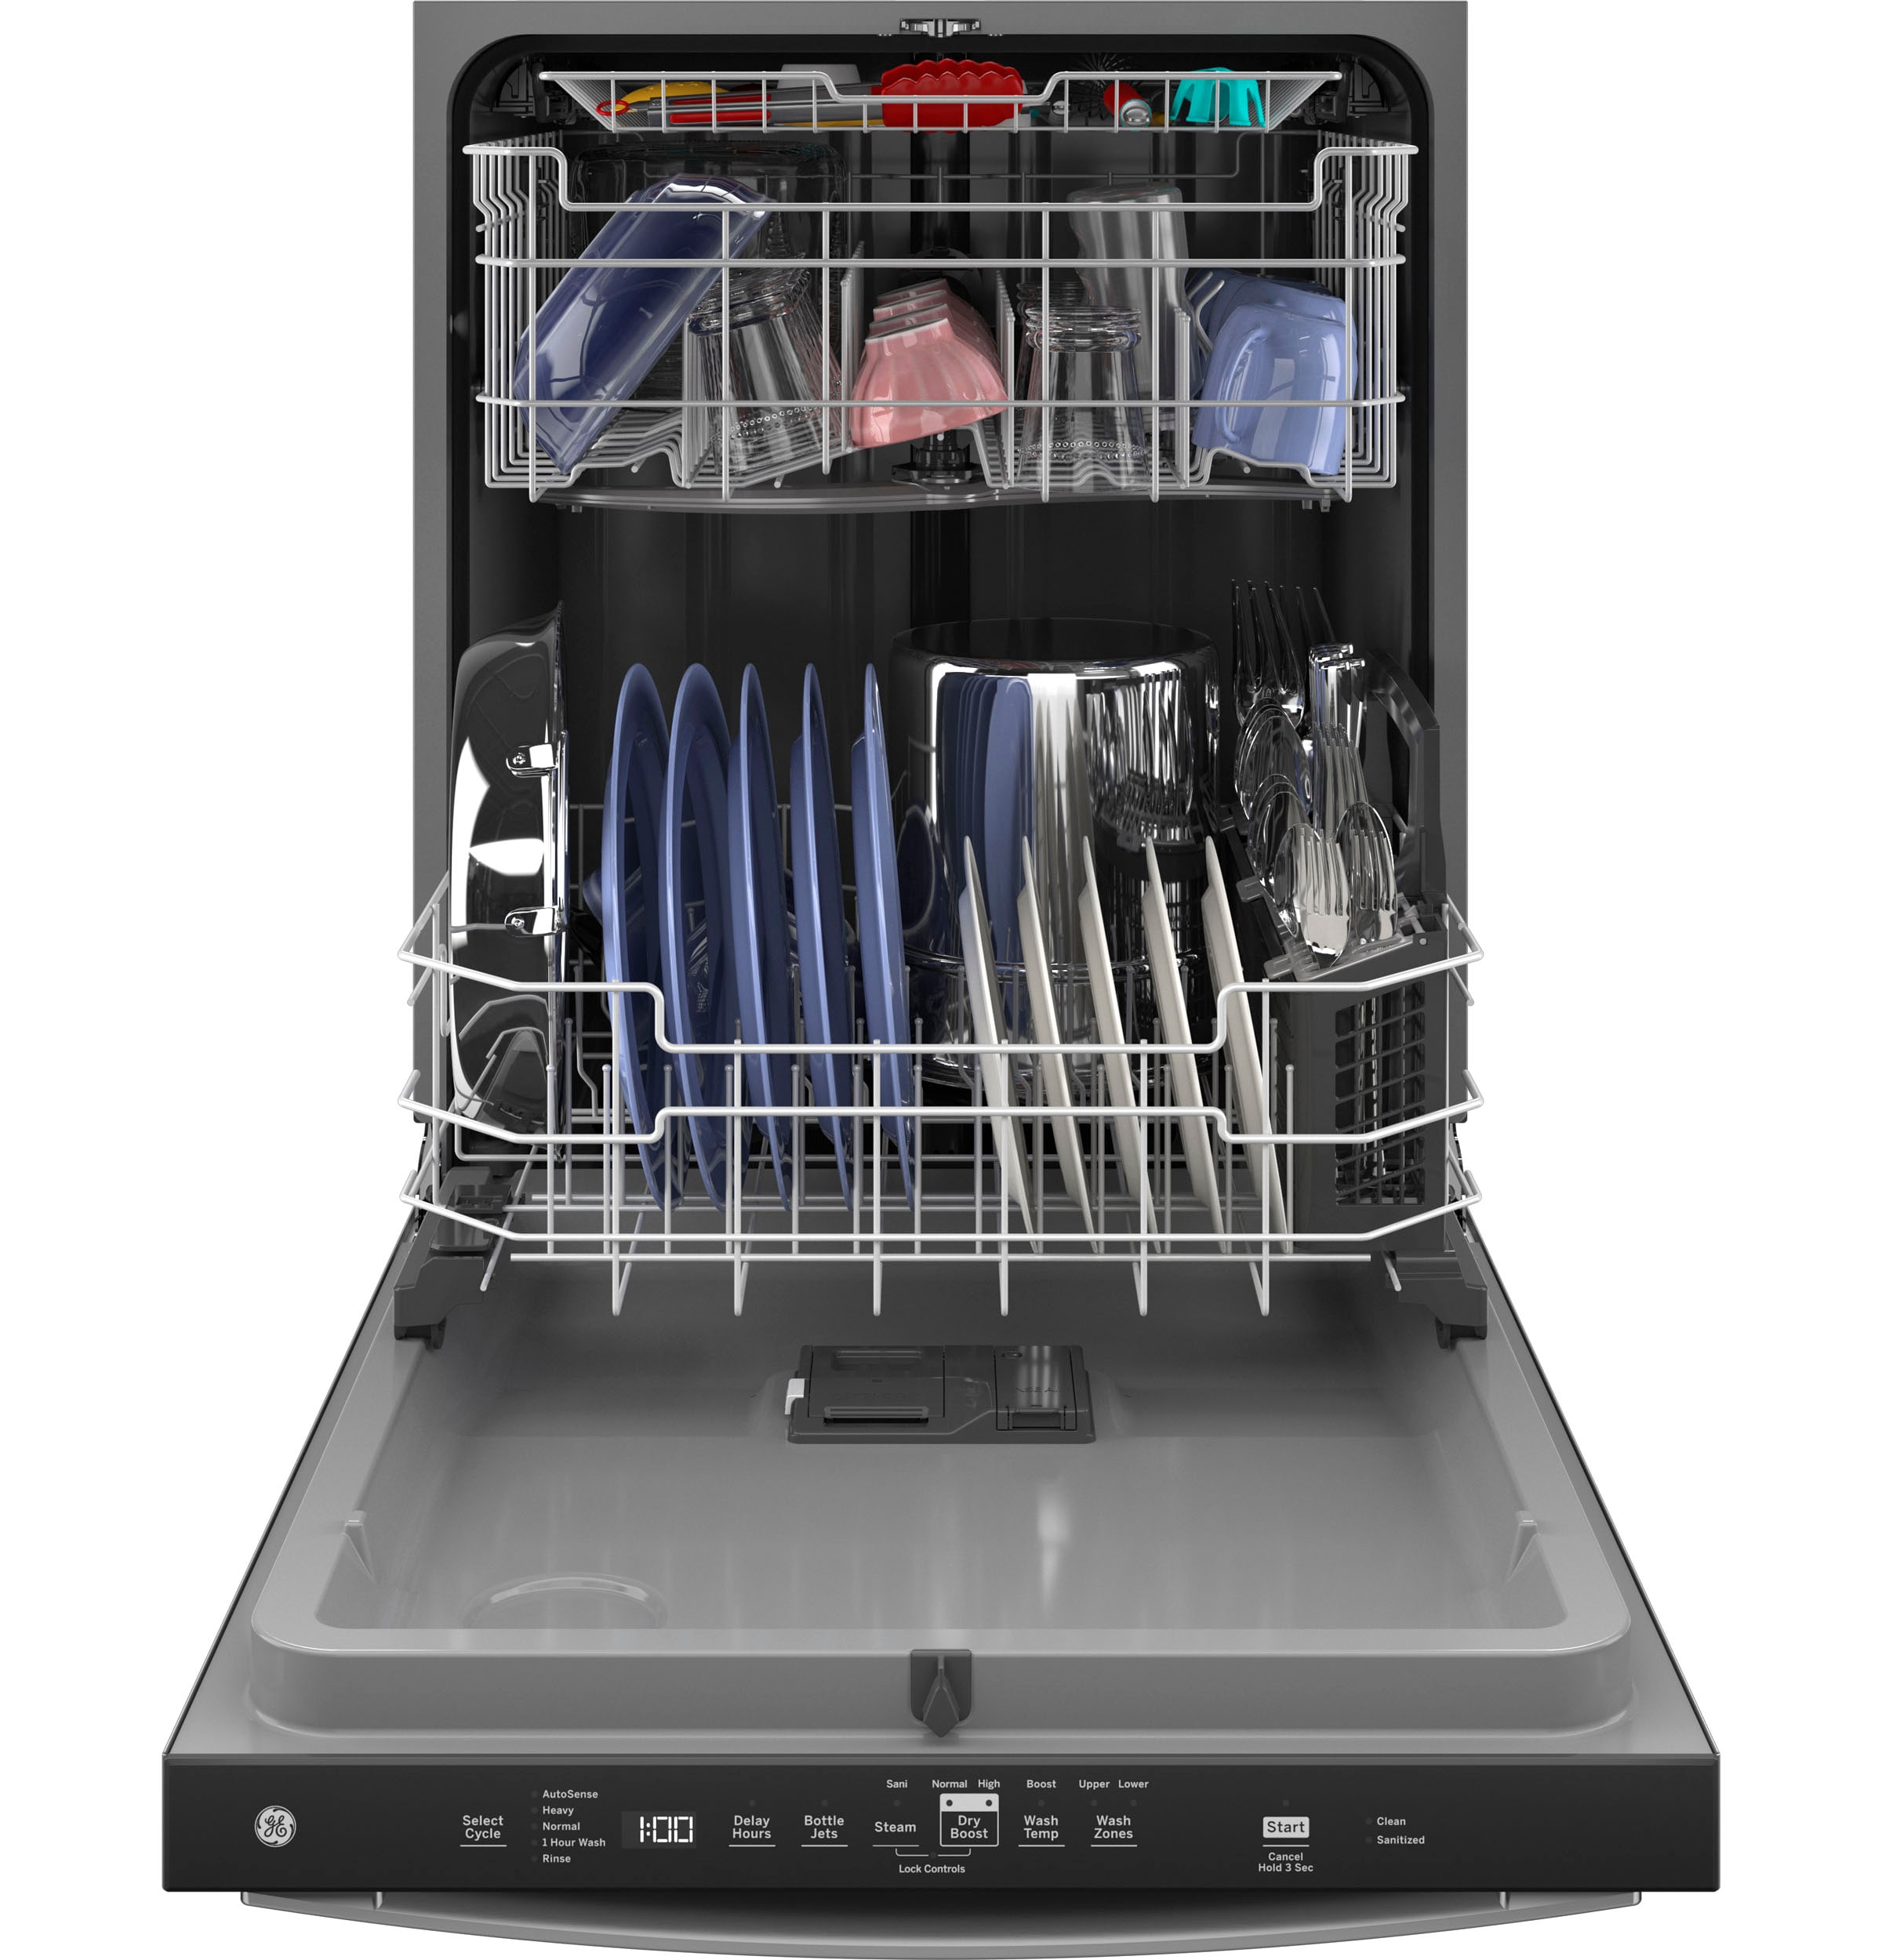 Buy GE ENERGY STAR 24 Interior Portable Dishwasher with Sanitize